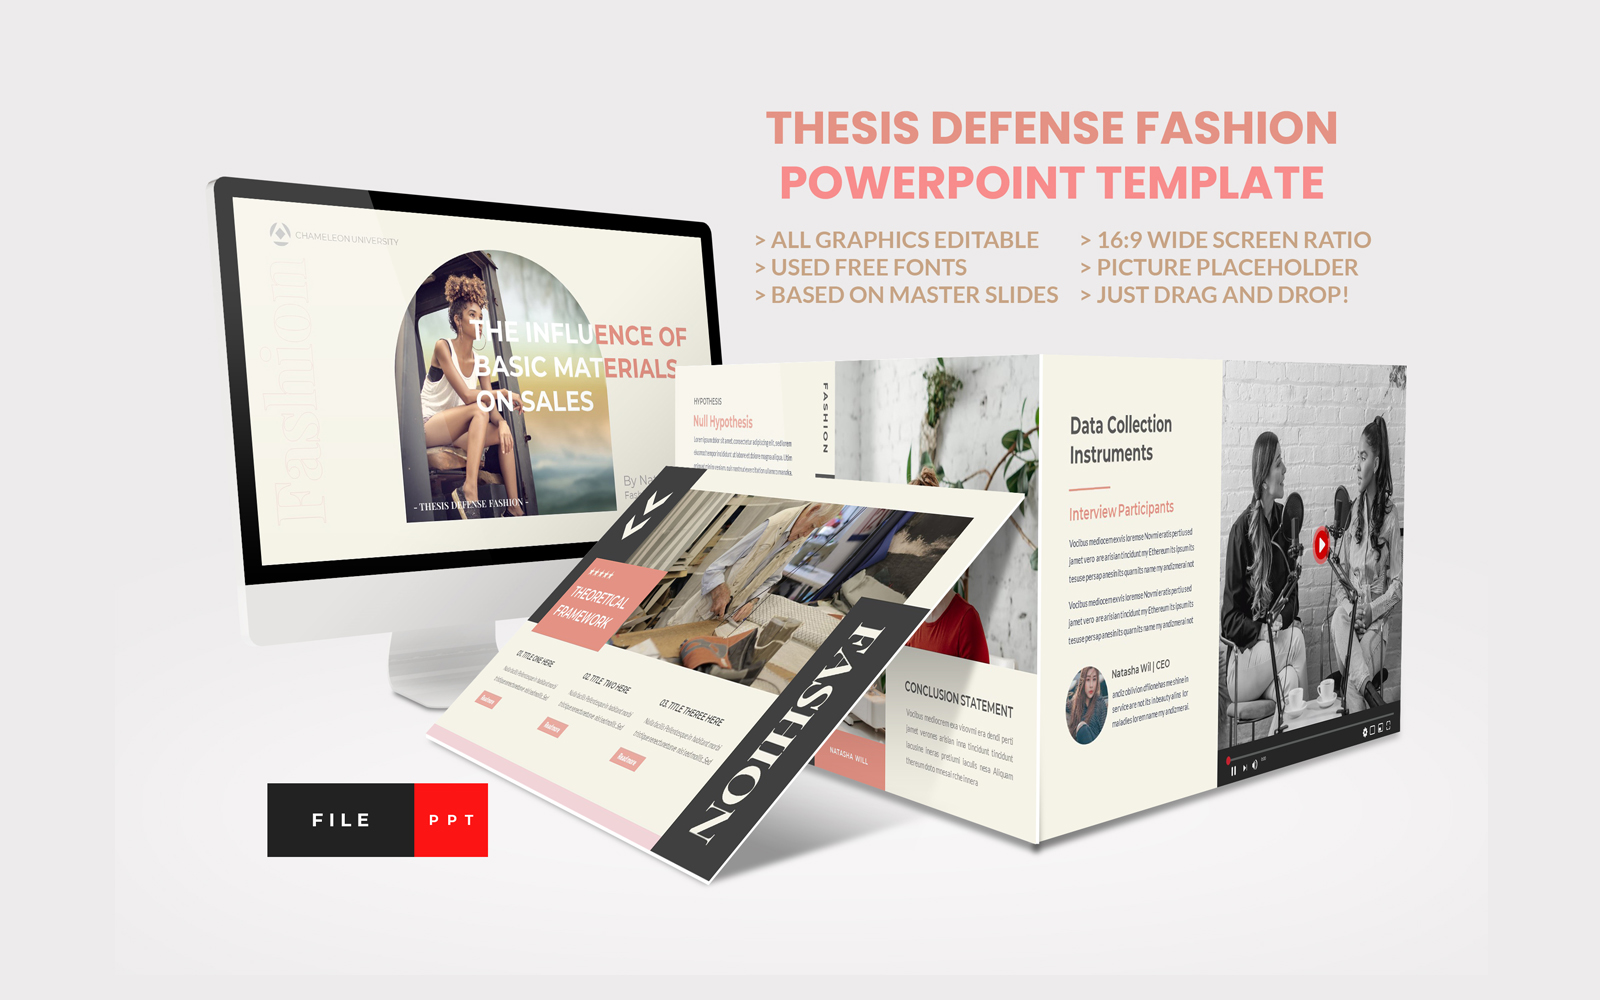 Thesis Defense Fashion PowerPoint Template